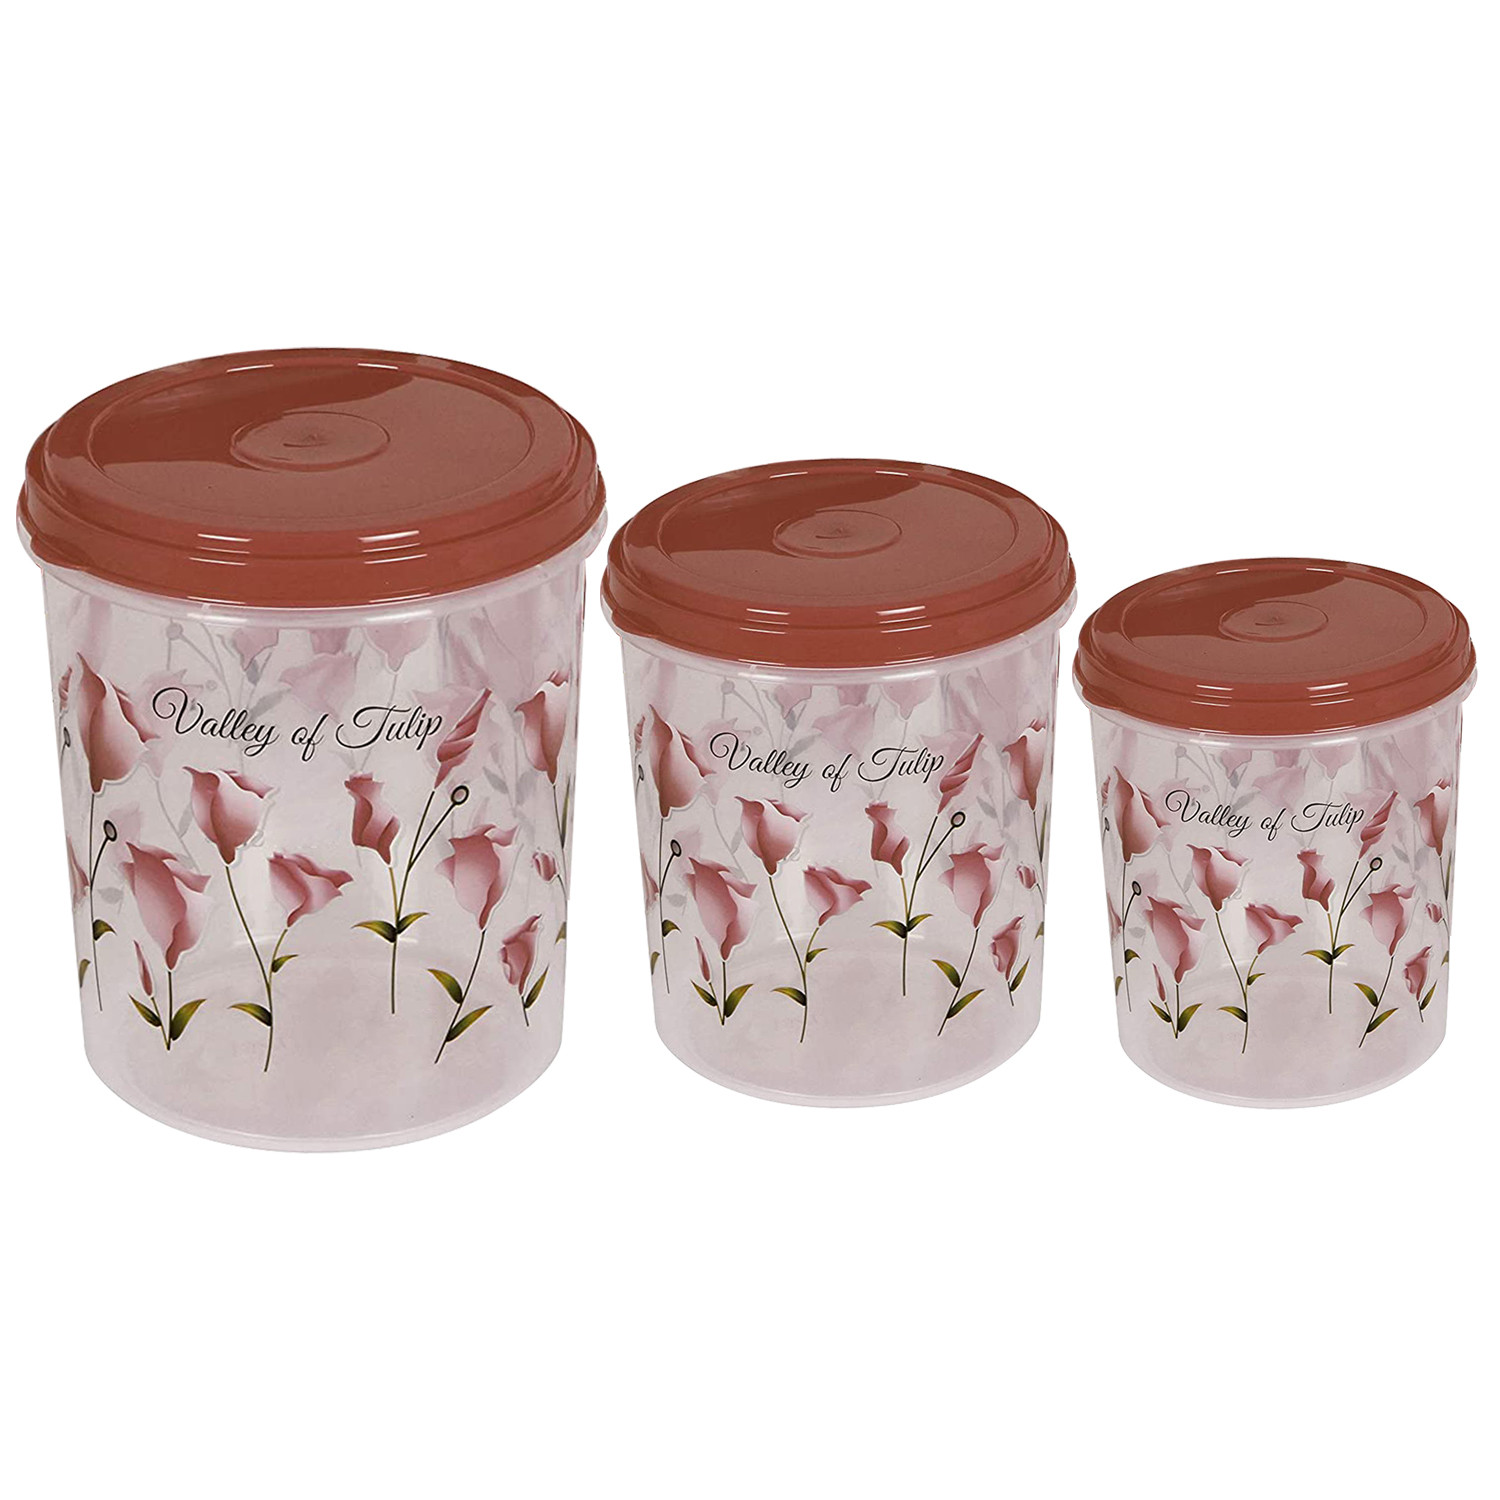 Kuber Industries Plastic Container|Container For Kitchen Storage Set|Air Tight Container|Tulip Printed 5 Litre,7 Litre,10 Litre Containers|Set of 3 (Brown)